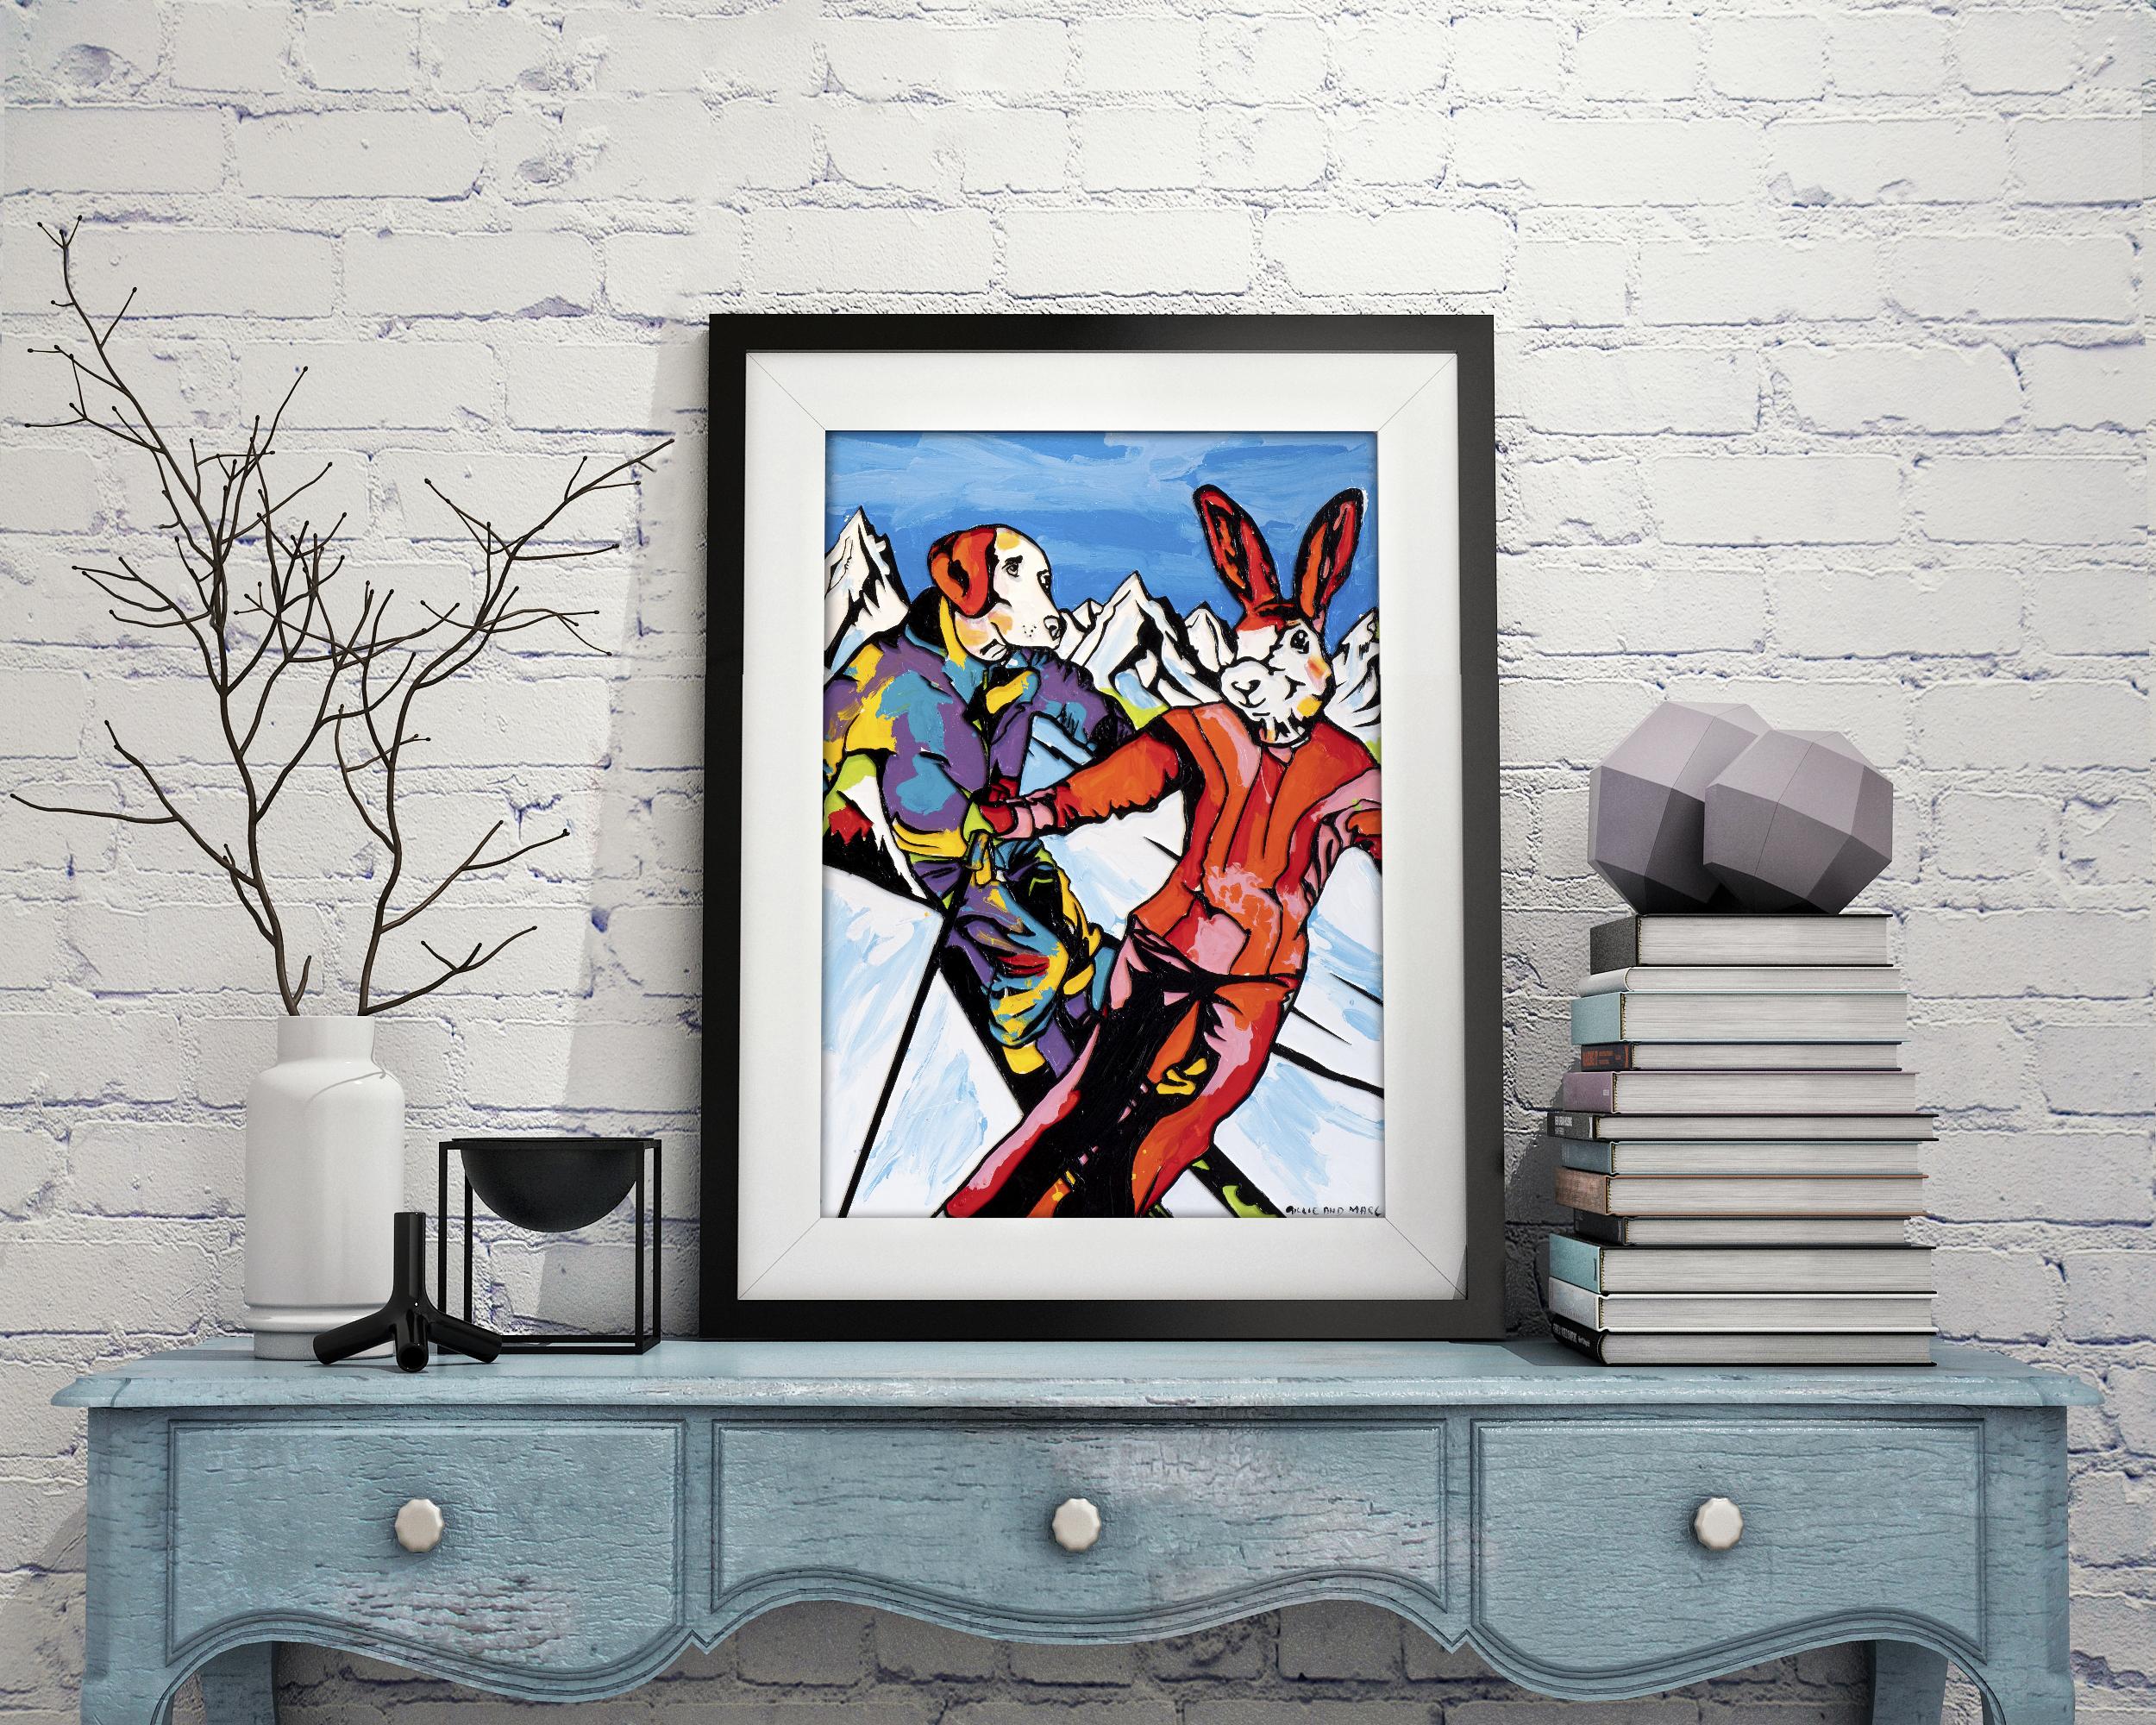 Pop Animal Print - Gillie and Marc - Limited Edition - Skiing - Together - Painting by Gillie and Marc Schattner